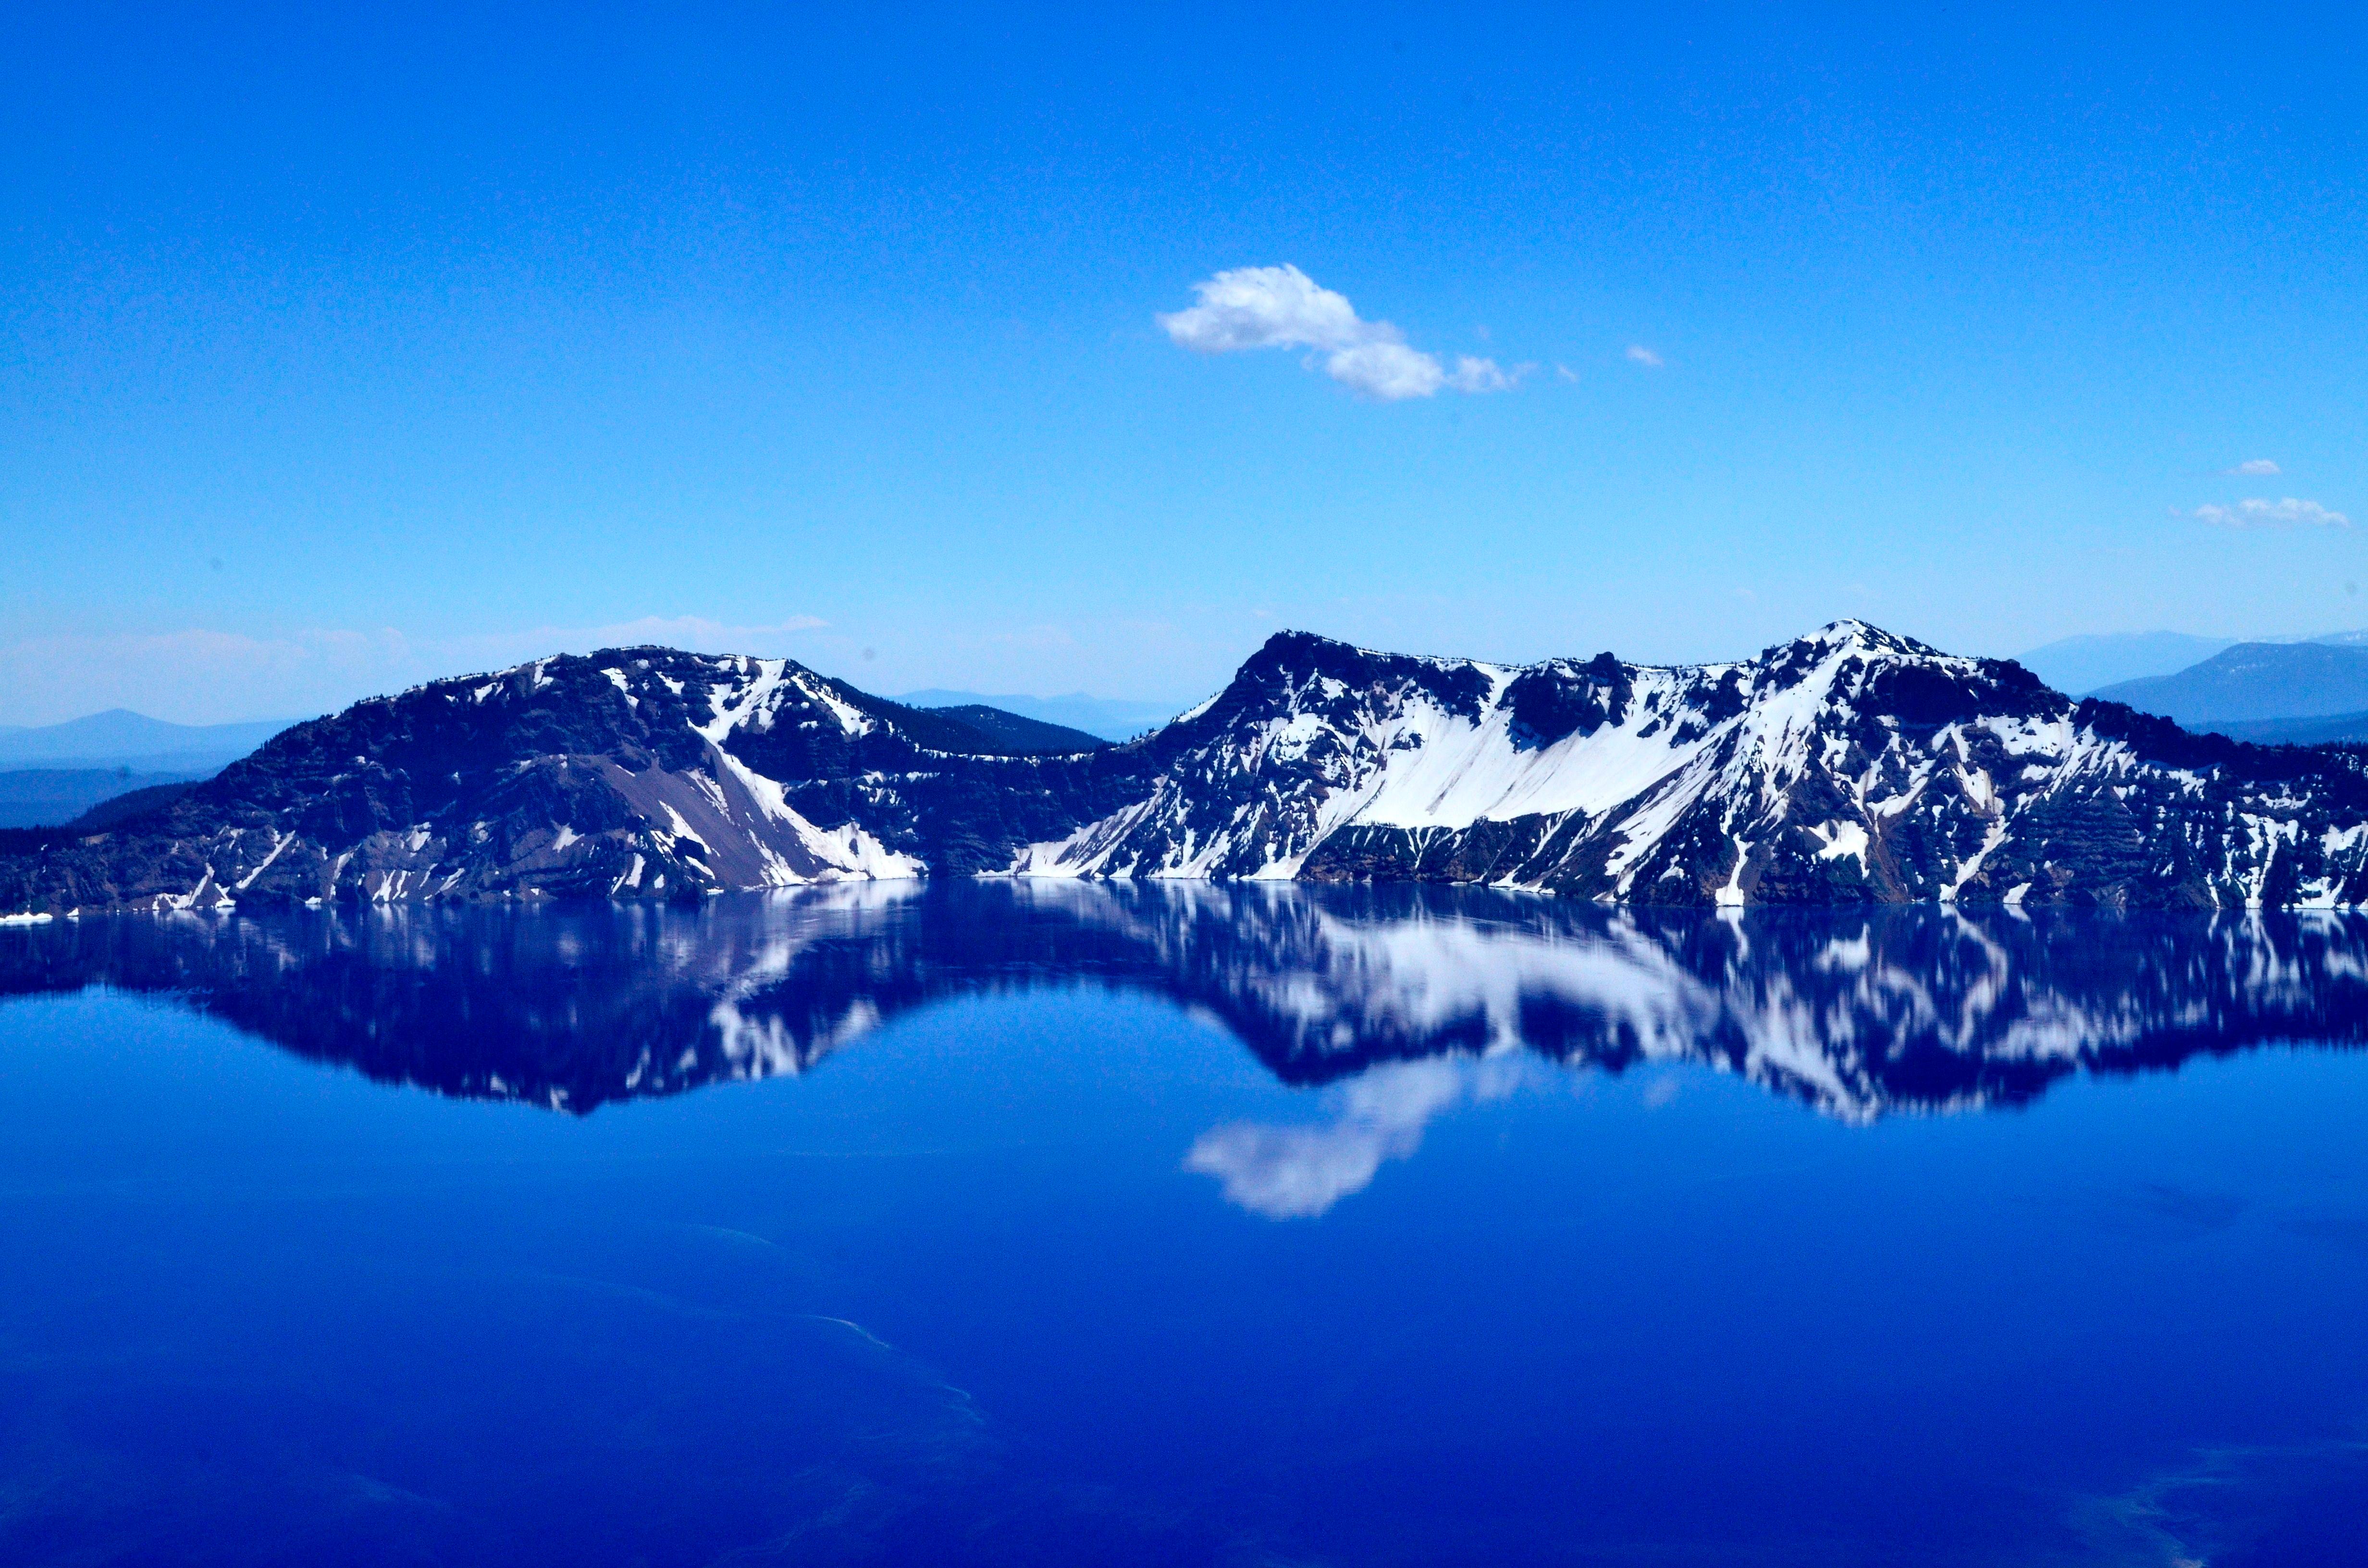 Following a rogue late-spring snowstorm, we arrived at Crater Lake to find all of the roads closed. Plan B: we set out on foot and postholed through thigh-deep snow to the top of the crater. We had the entire place to ourselves on this perfect sunny